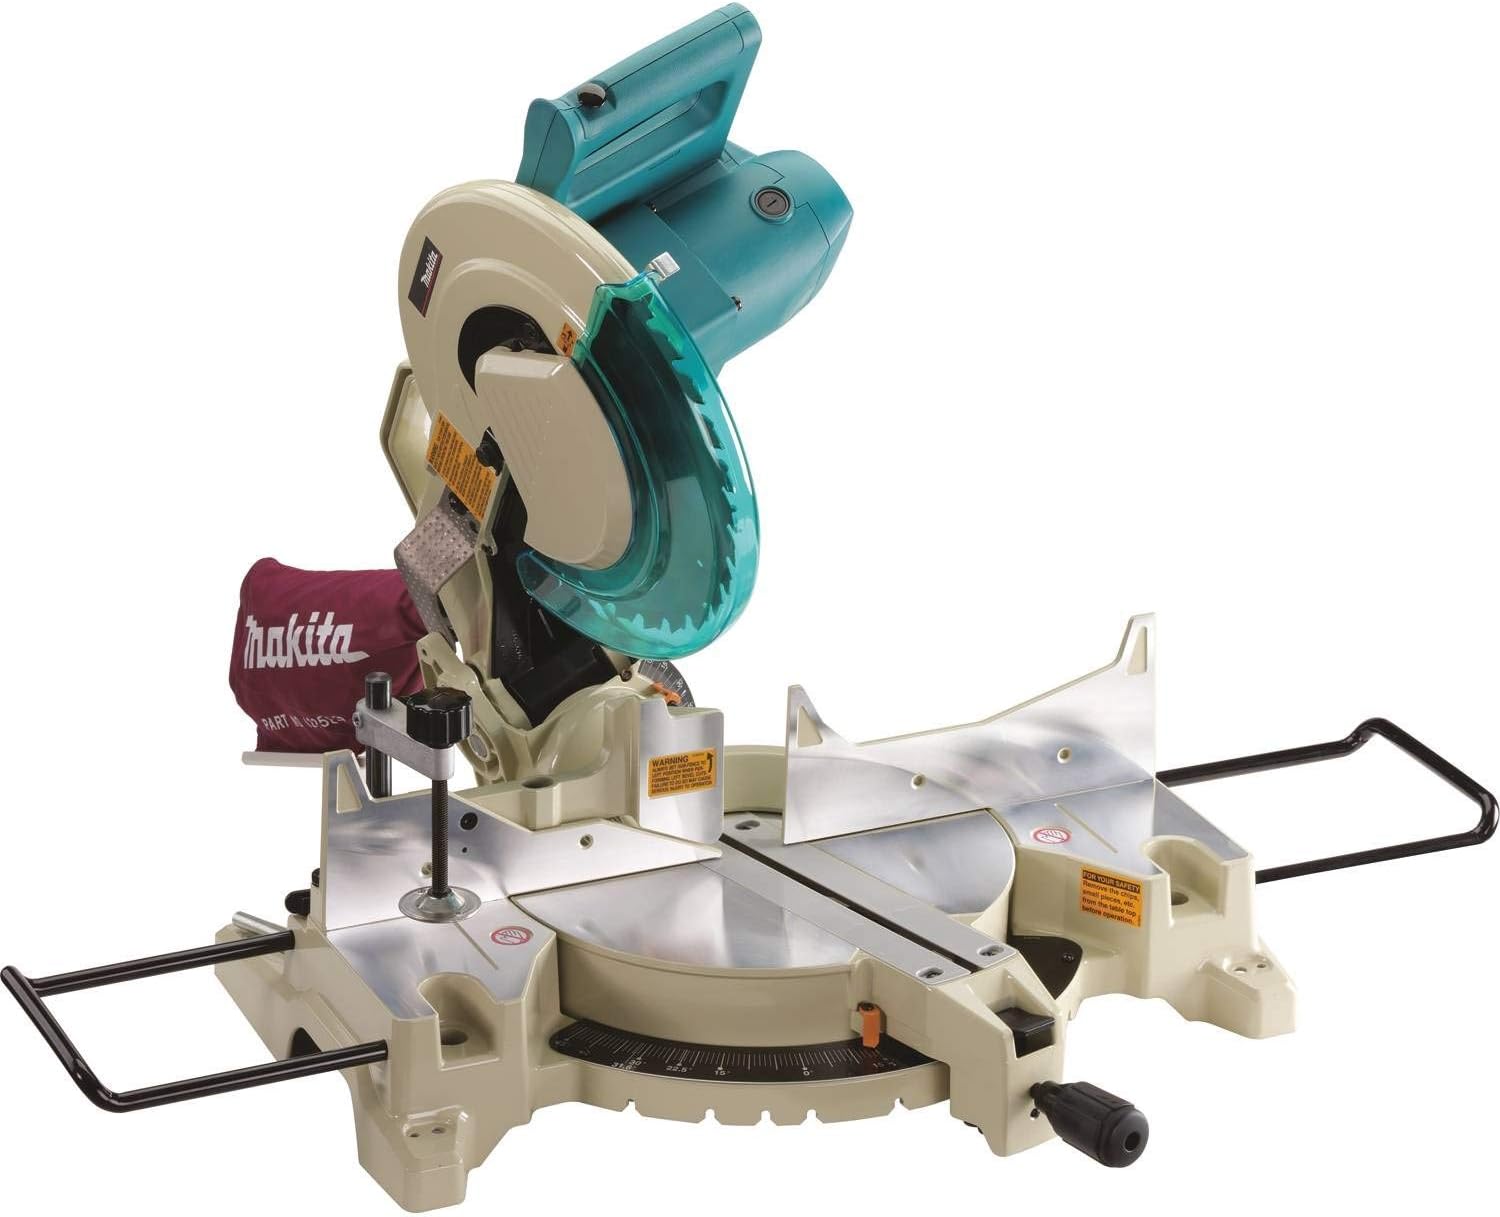 value compound miter saw detailed review